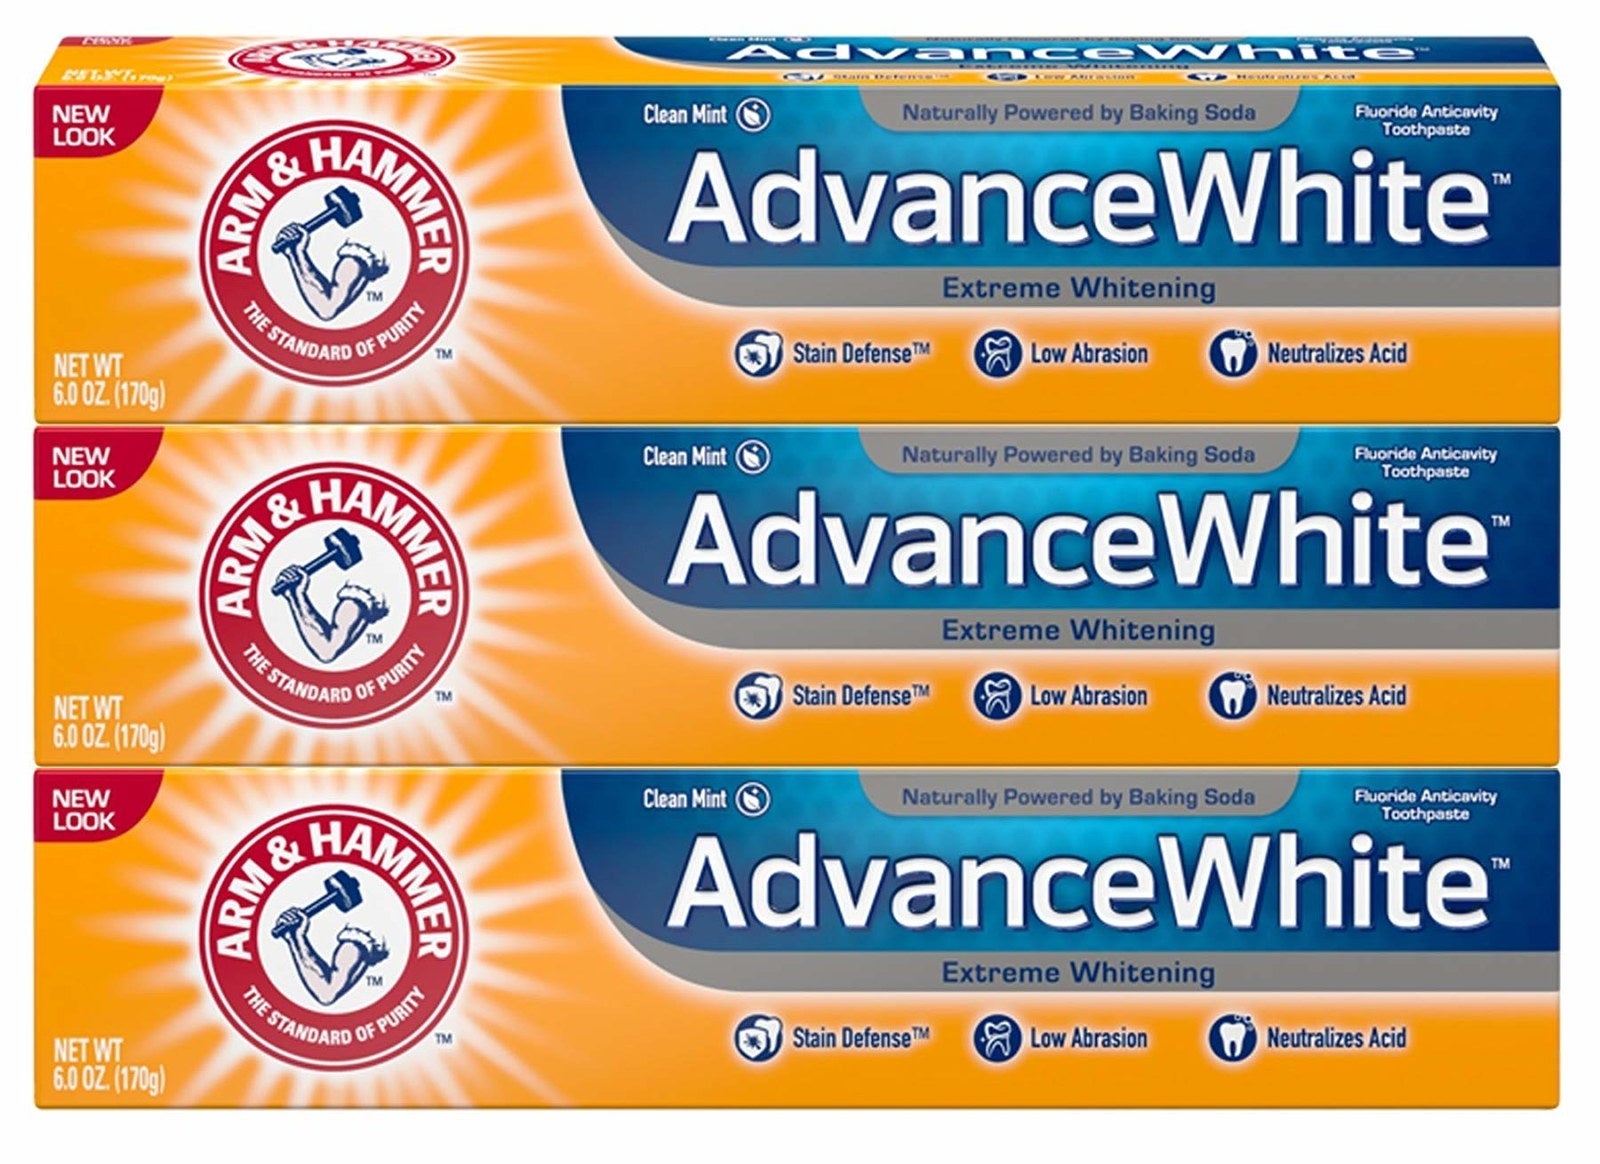 Three boxes of Arm and Hammer AdvanceWhite toothpaste